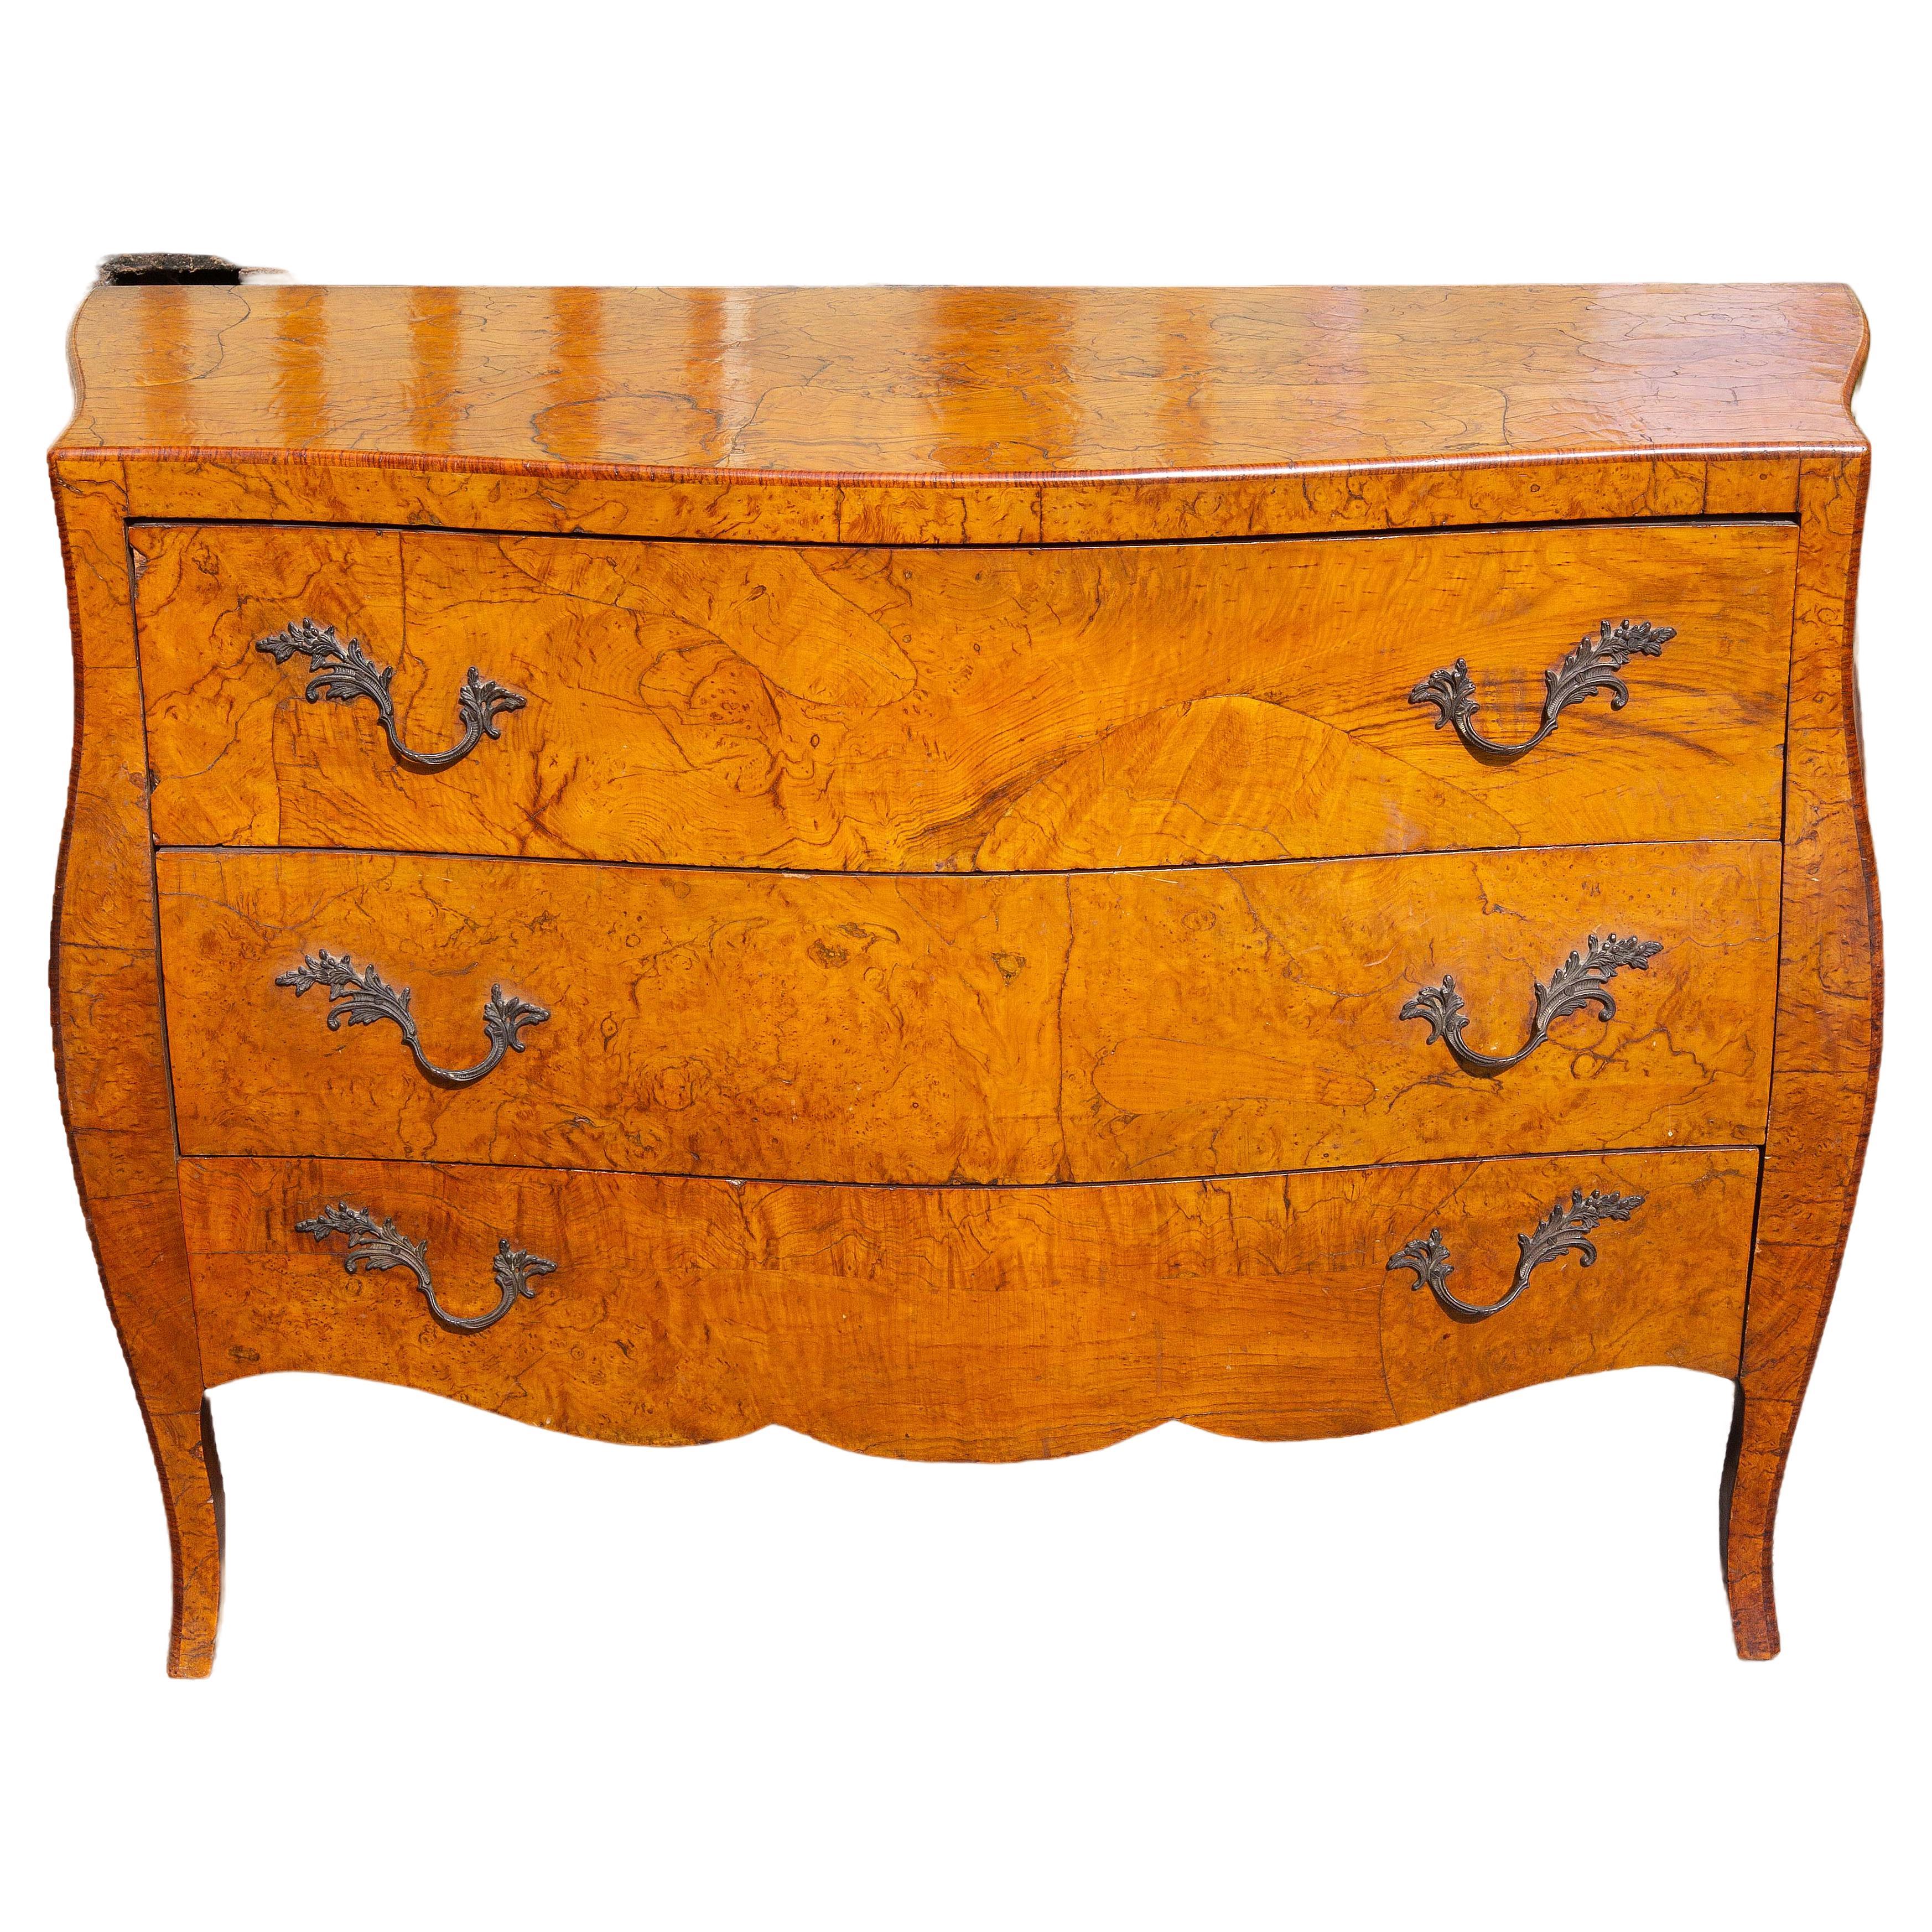 Finest large Italian olive wood commode. Circa 1960's. Exceptional quality figured wood.  Please, contact us for additional shipping quotes. Joseph Dasta Antiques